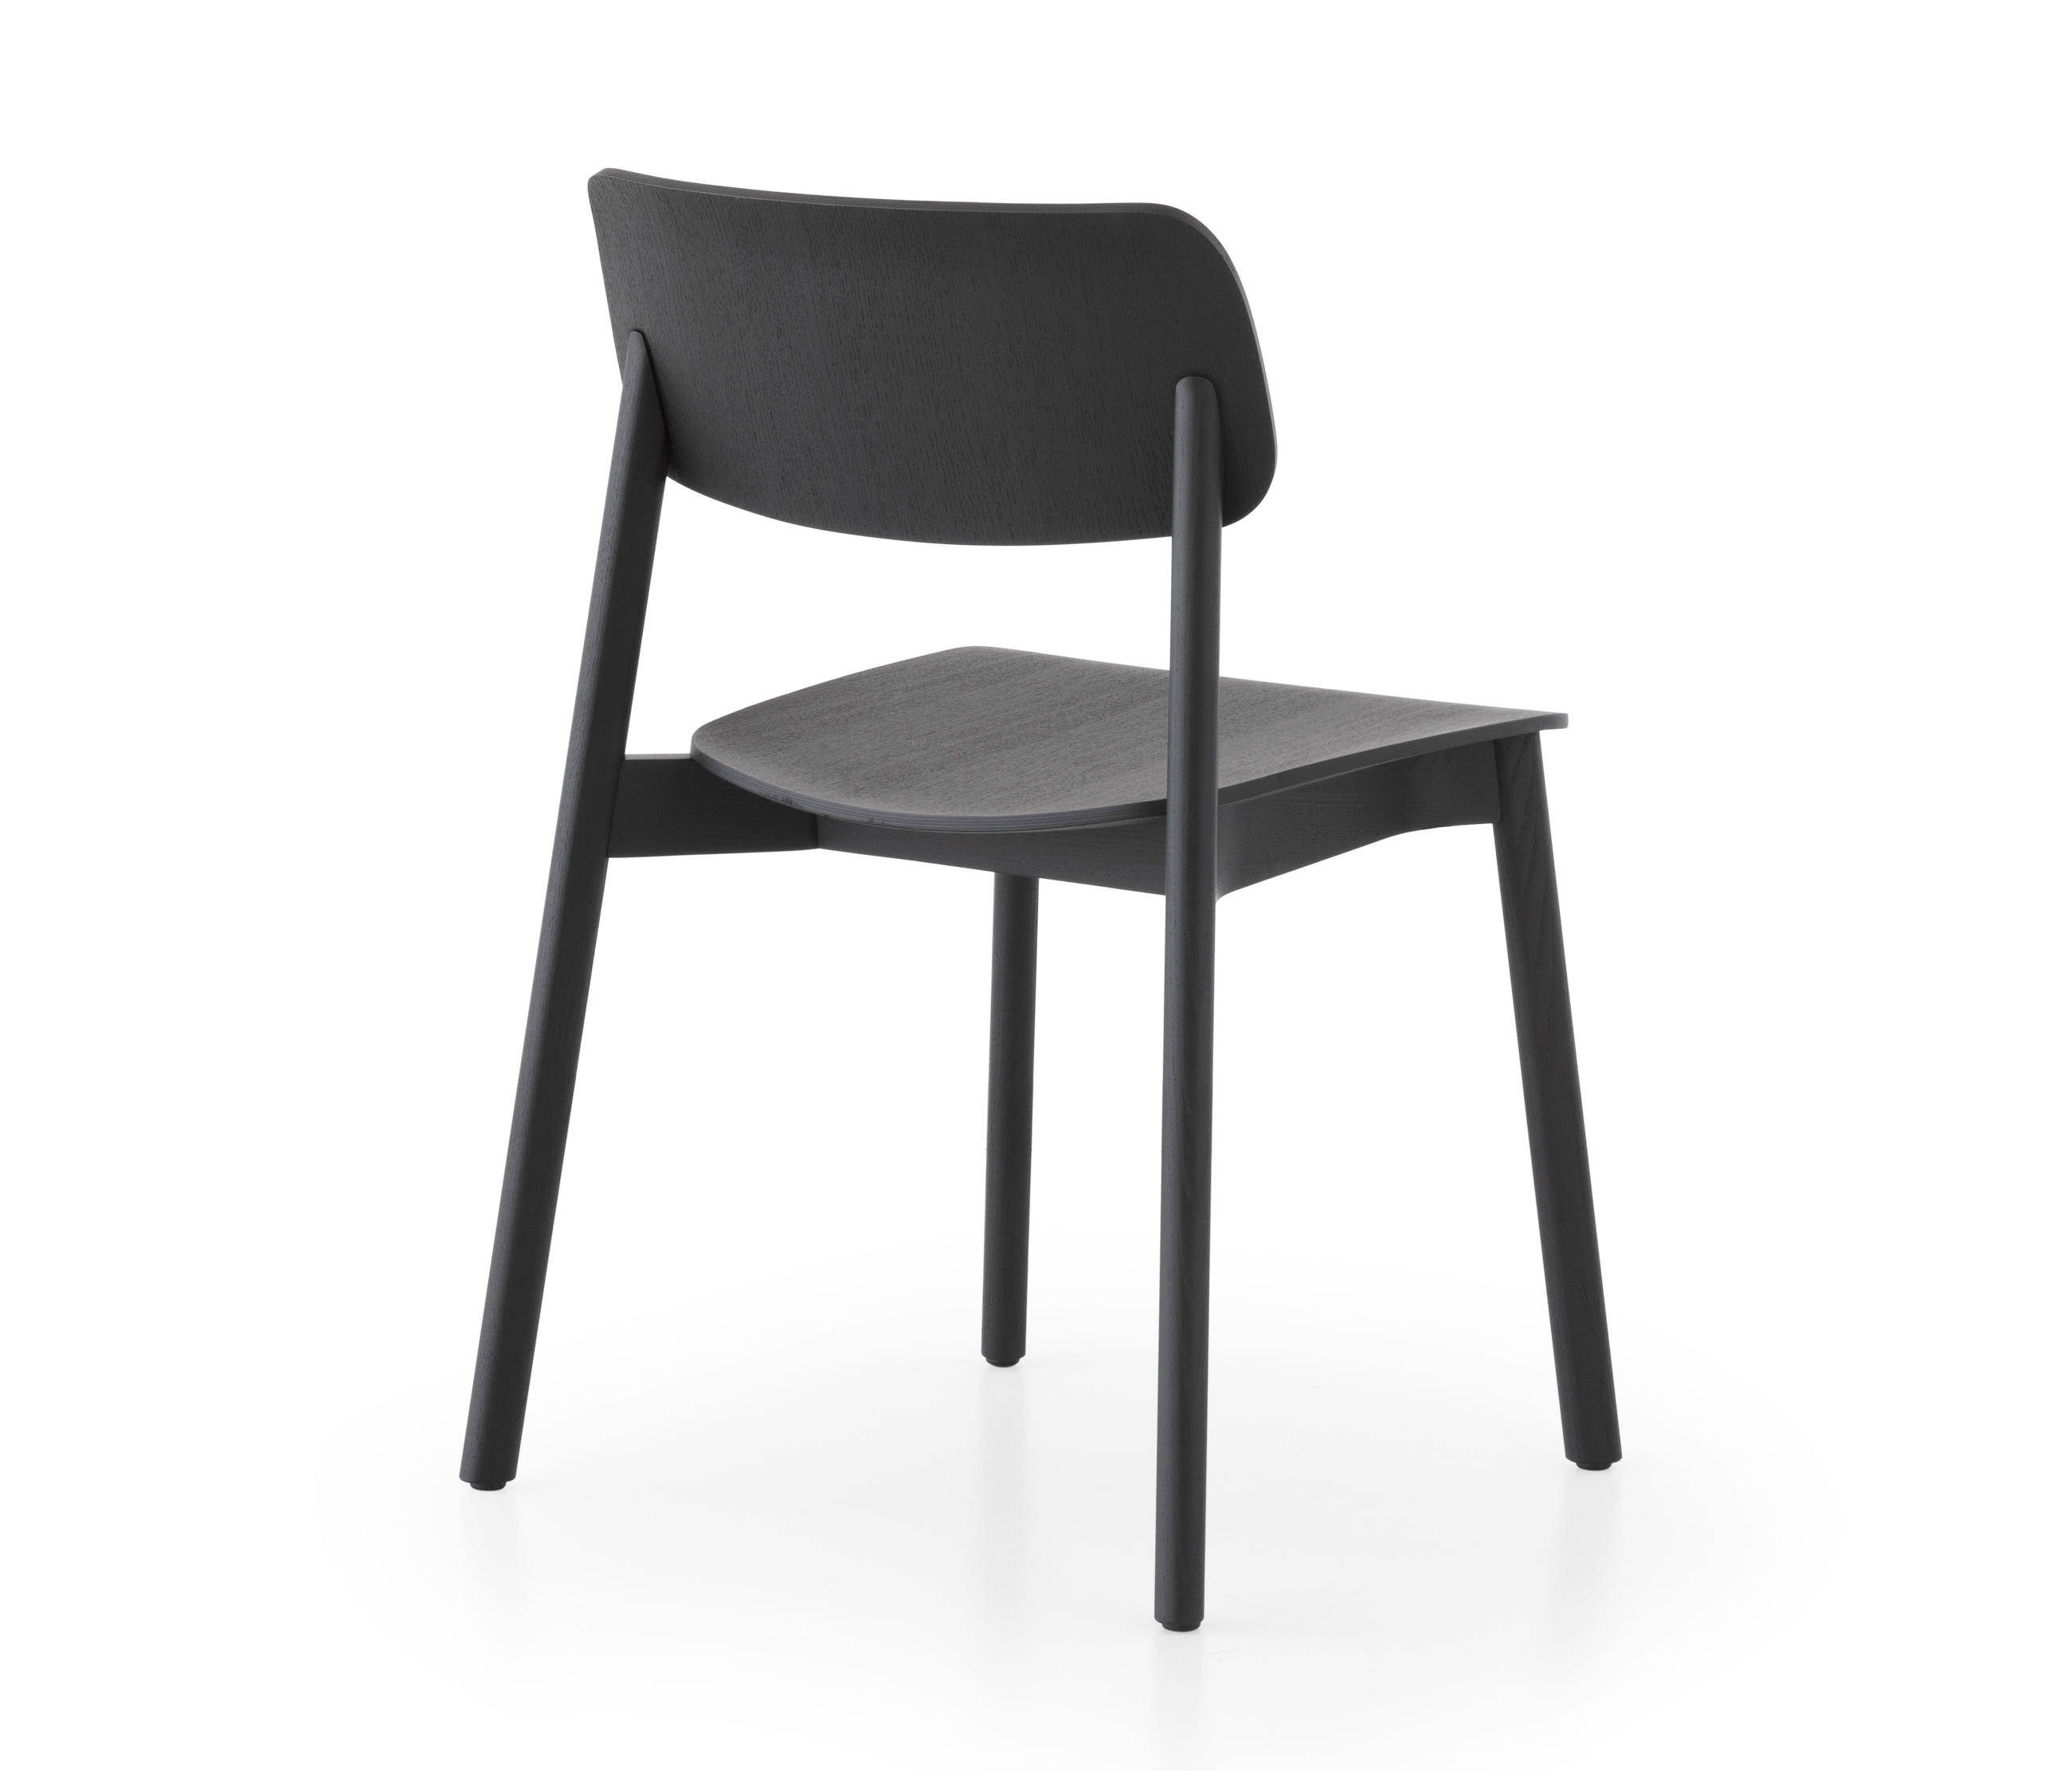 OIVA S370 - Chairs from lapalma | Architonic